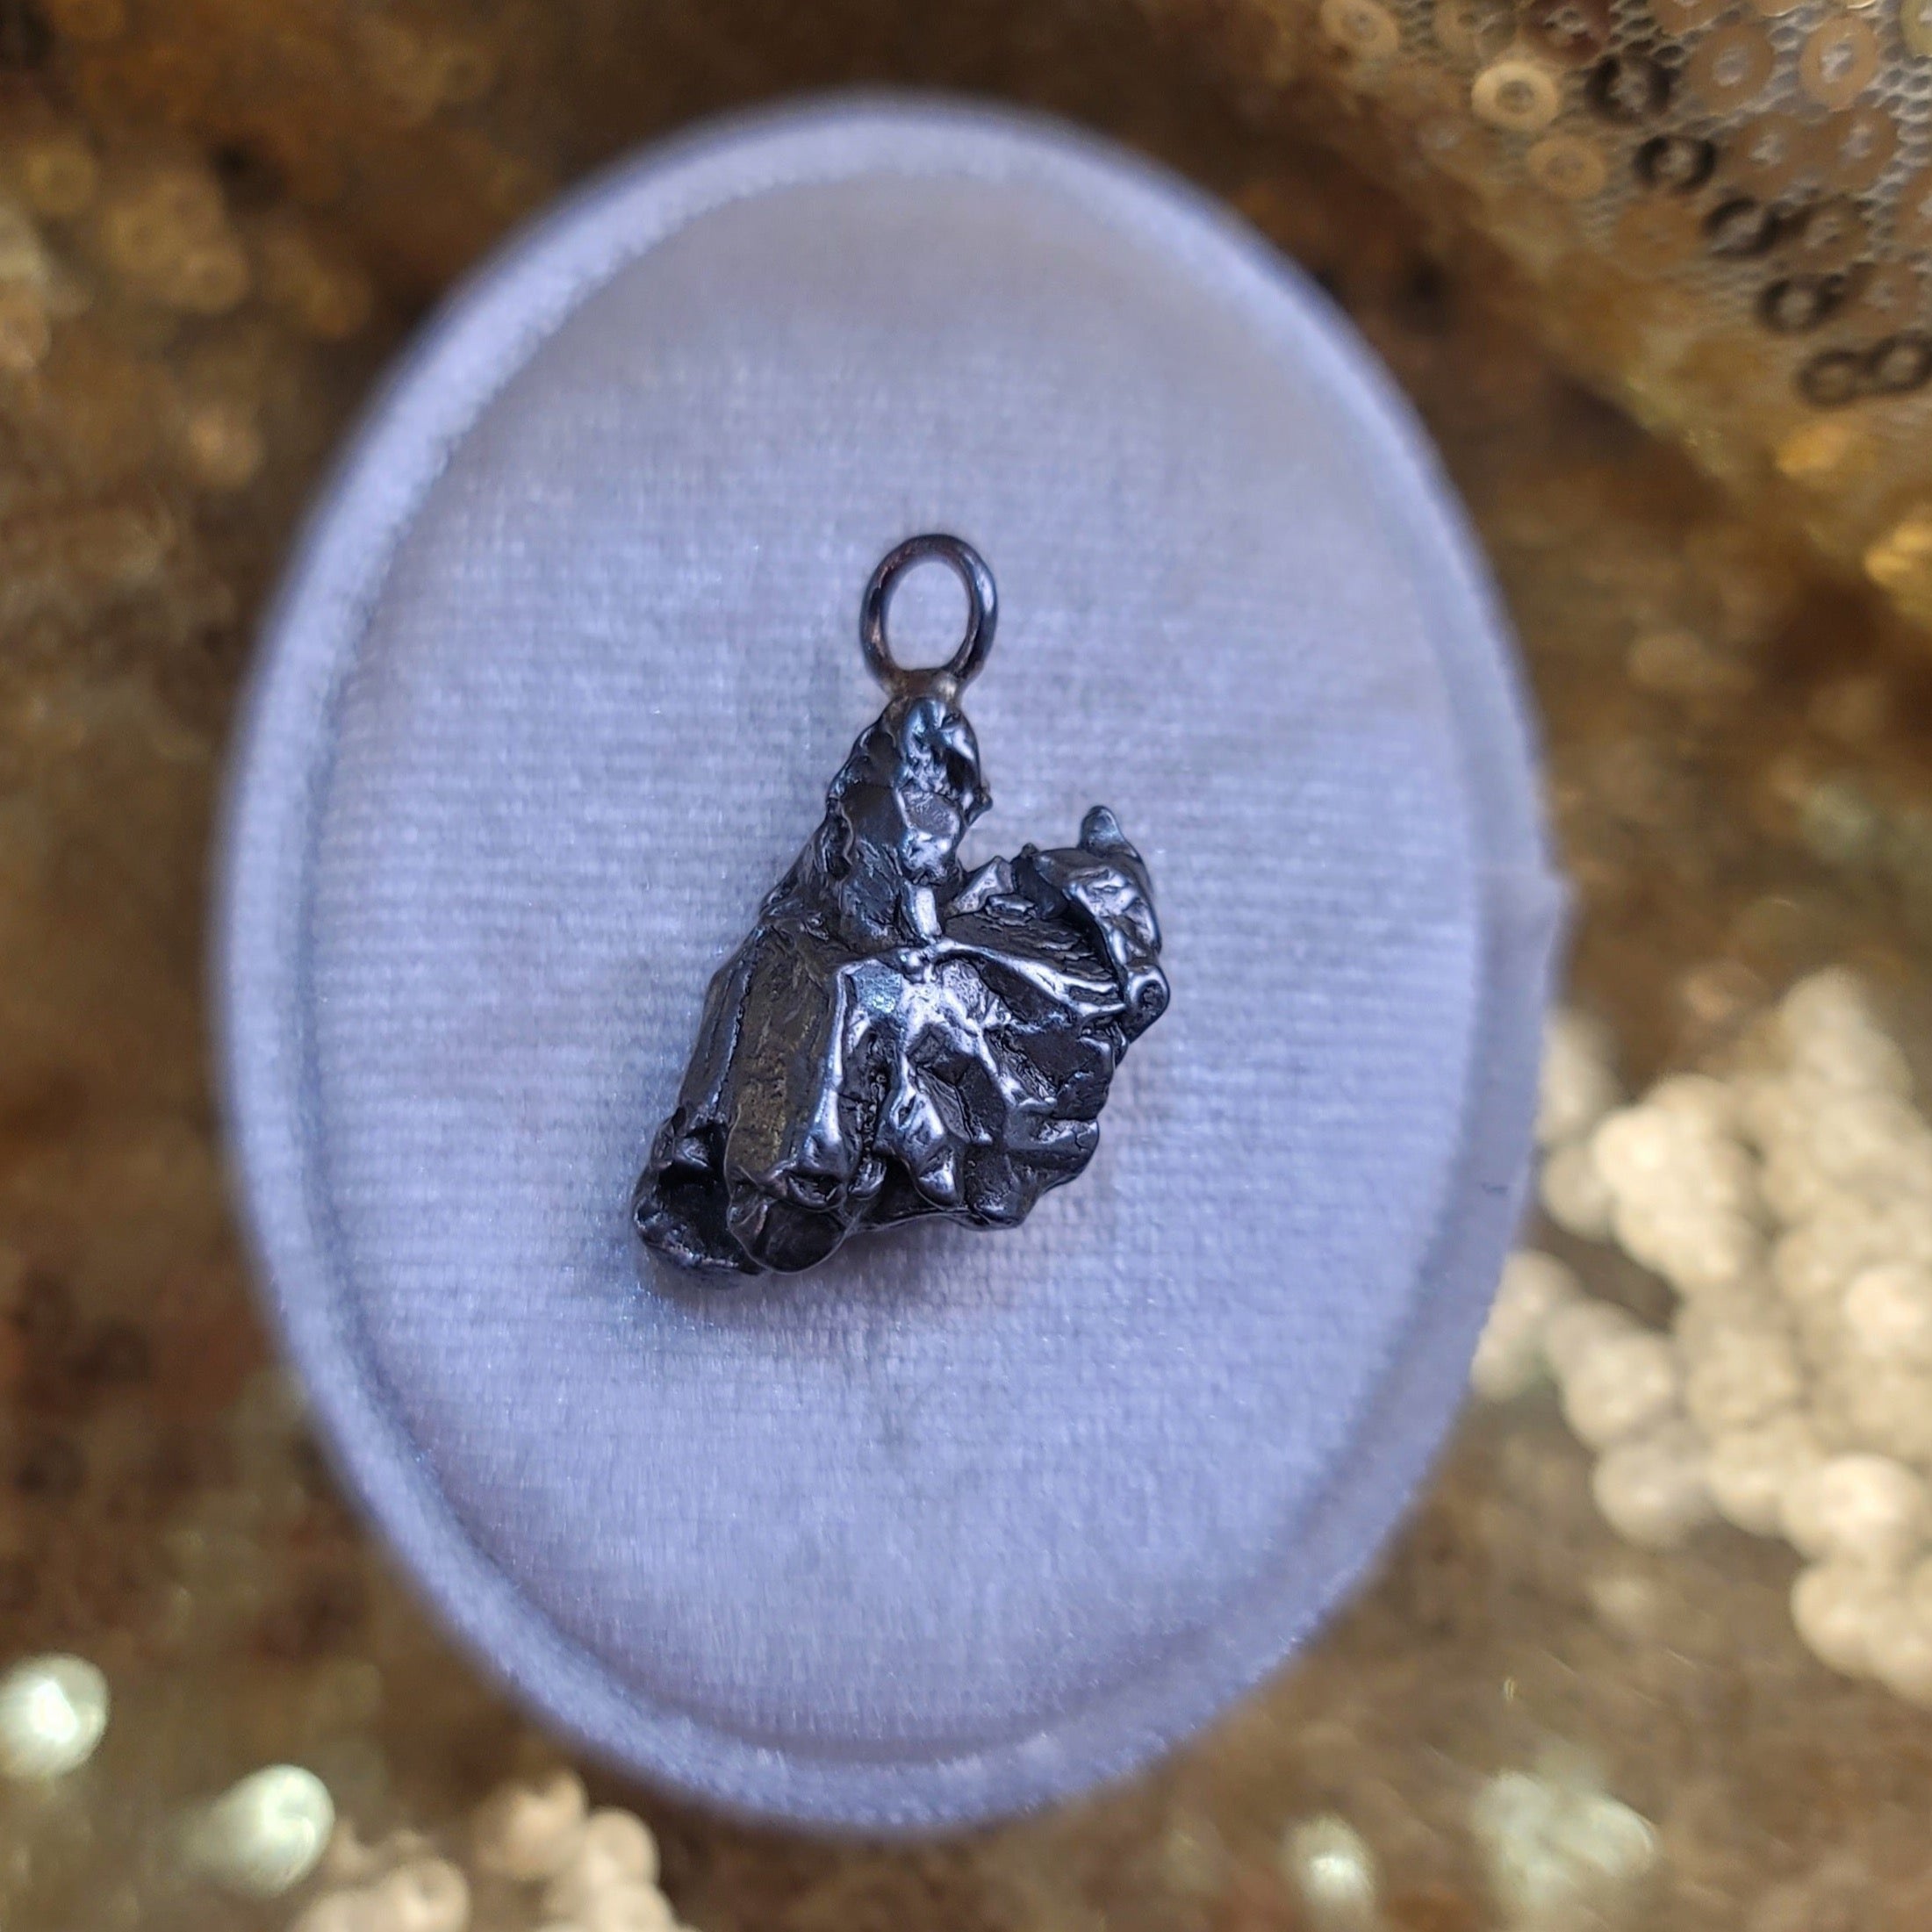 Meteorite (Campo del Cielo) Specimen Necklace for Strengthening Solar Energy Within and Positive Life Force Energy.